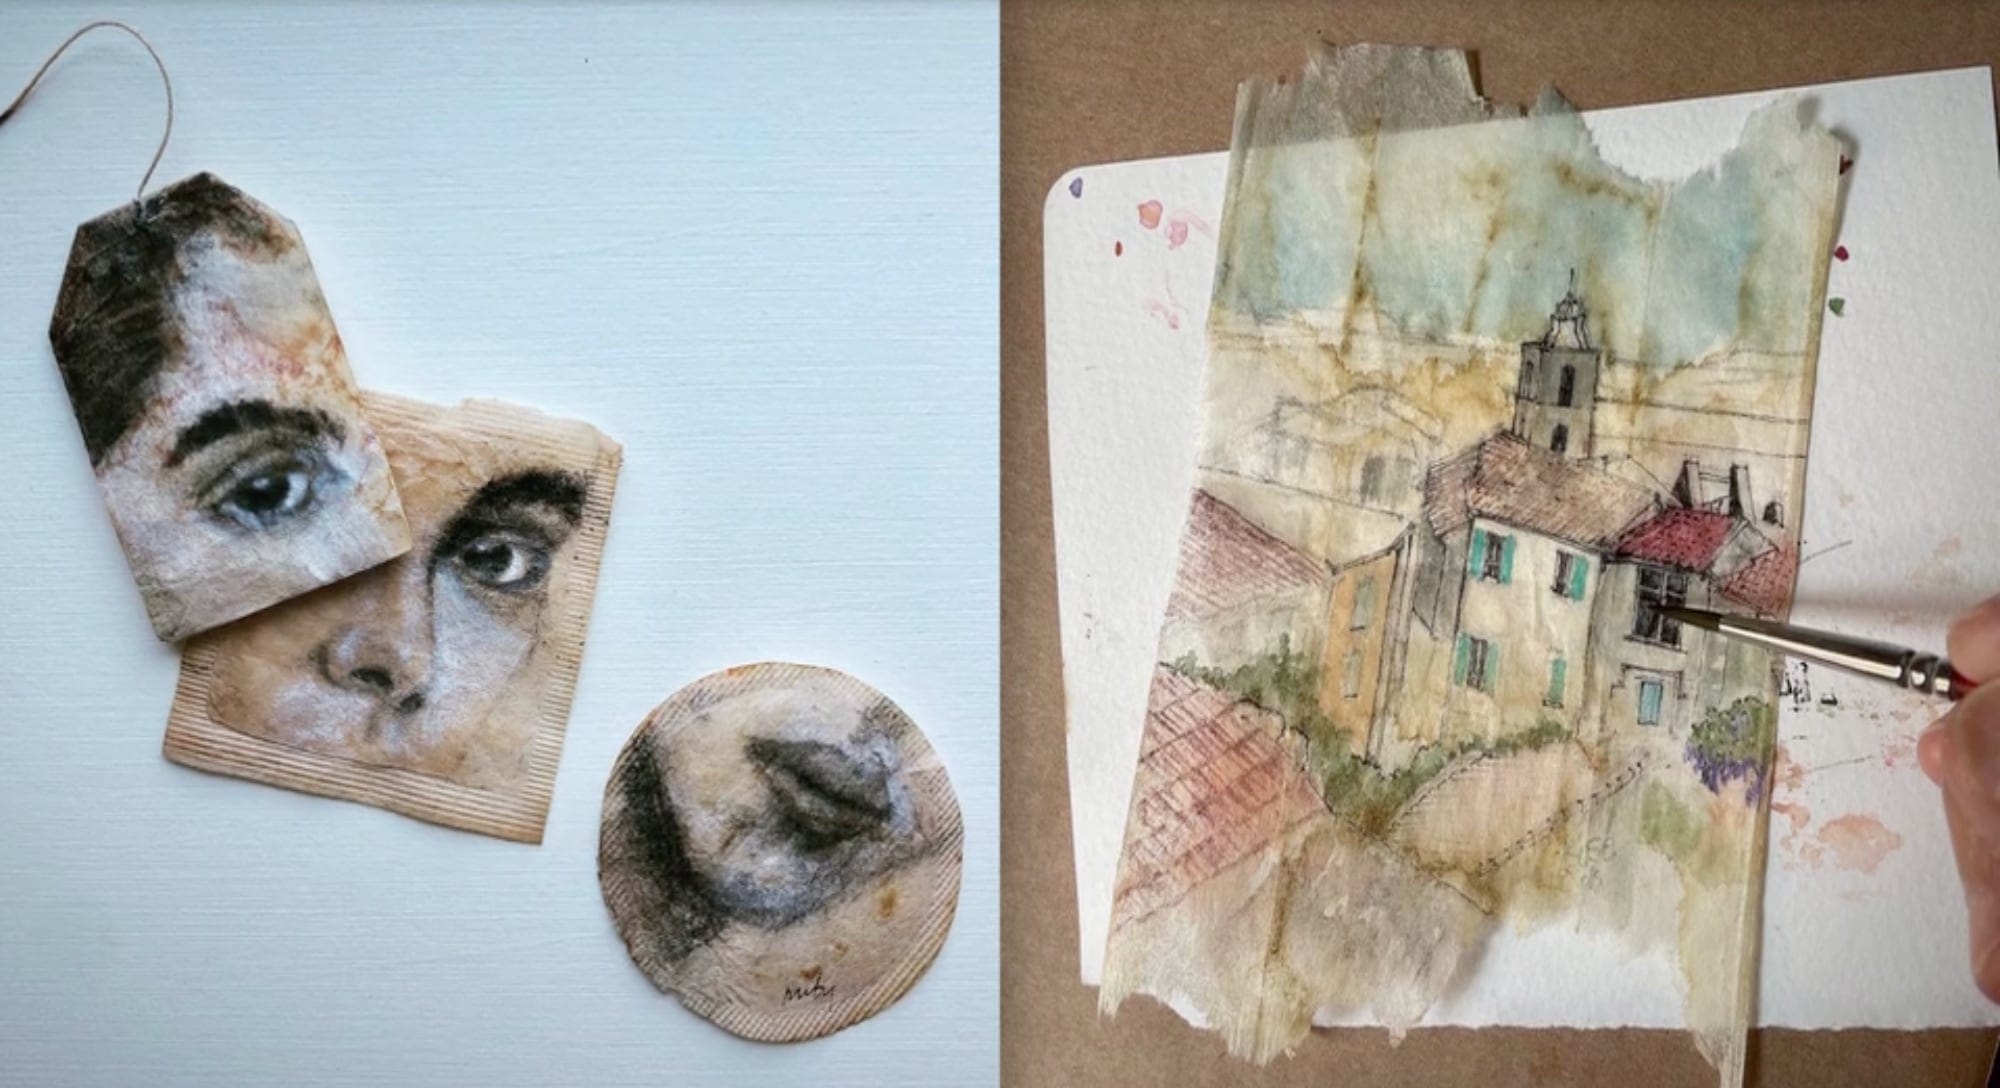 left: three fragmented portraits on tea bags. right: a hand paints an architectural city scene on a tea bag